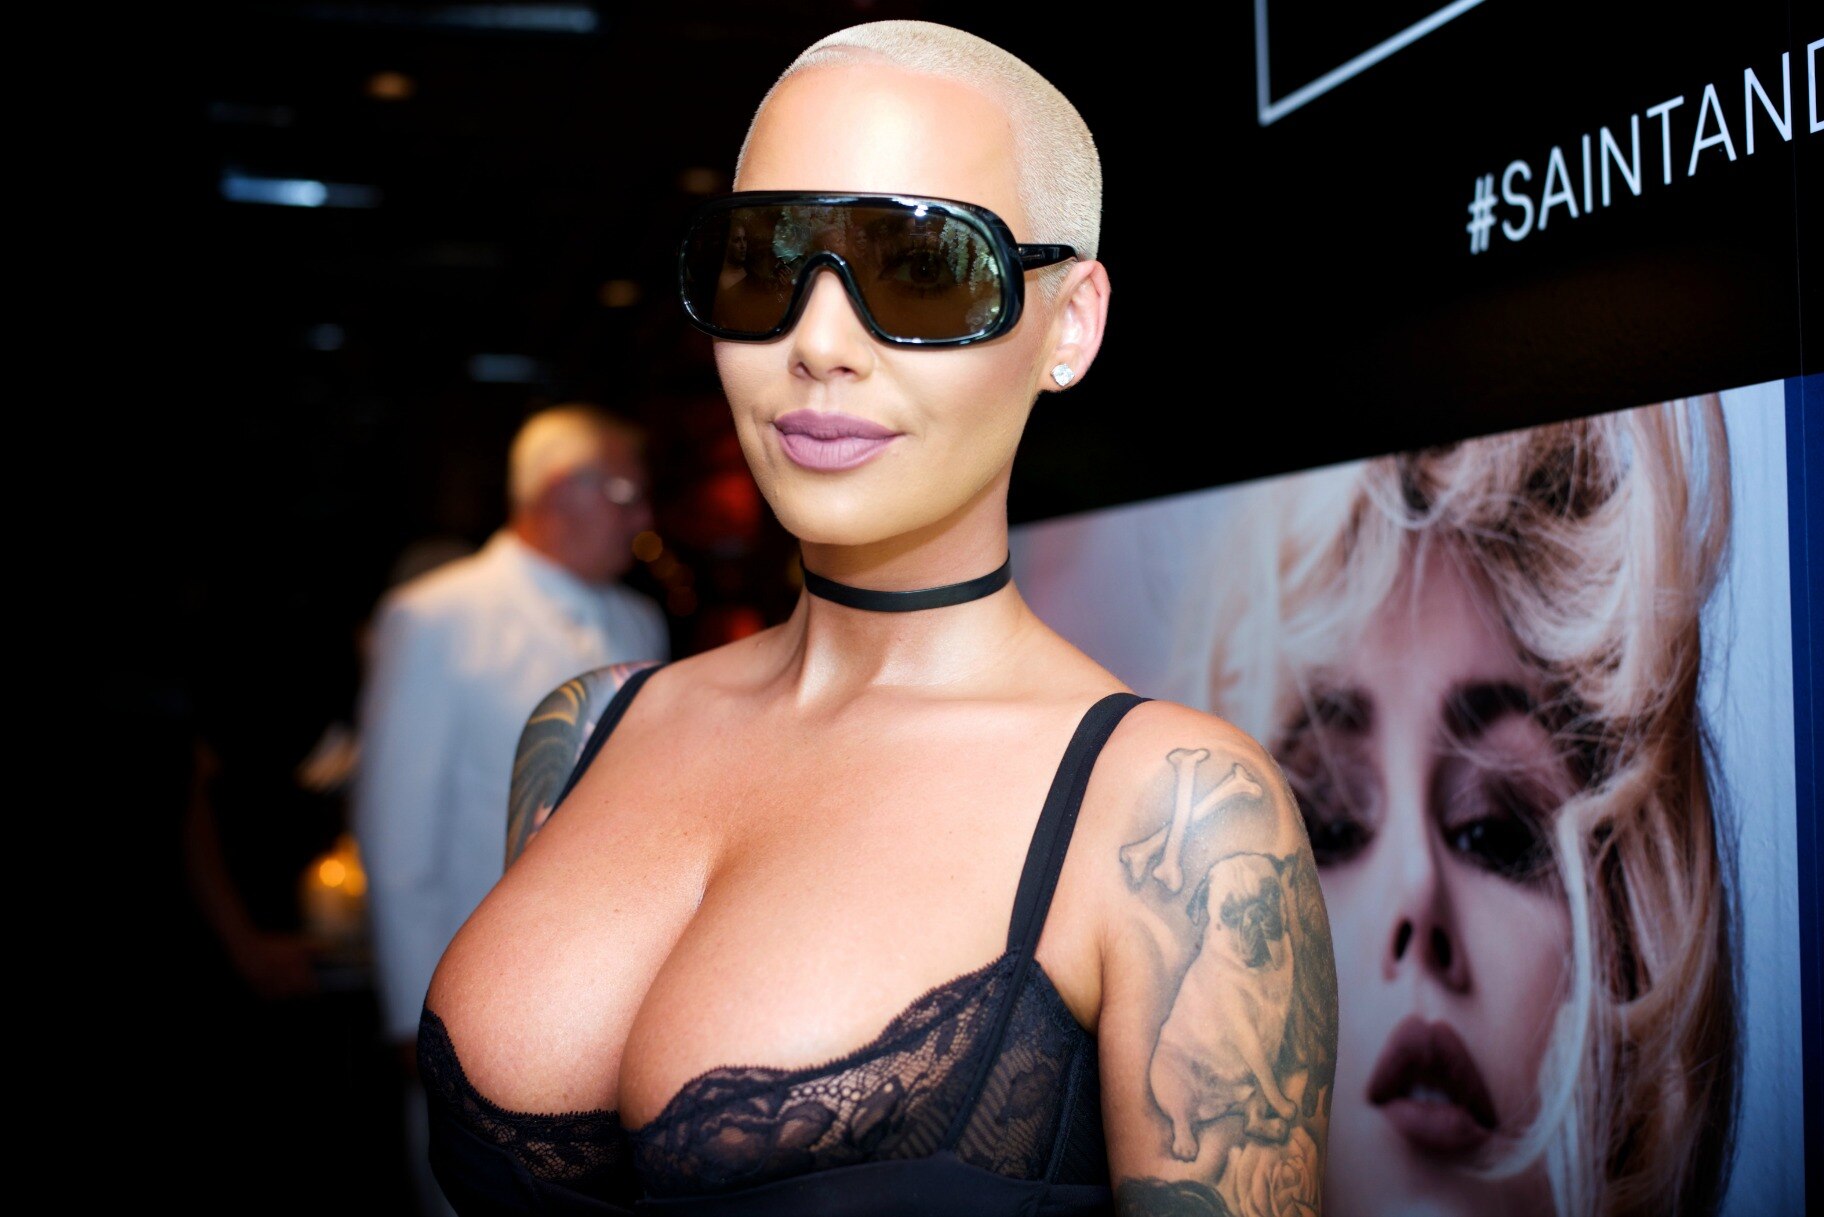 Amber Rose Went All Out On A Romantic Gift for 21 Savage.